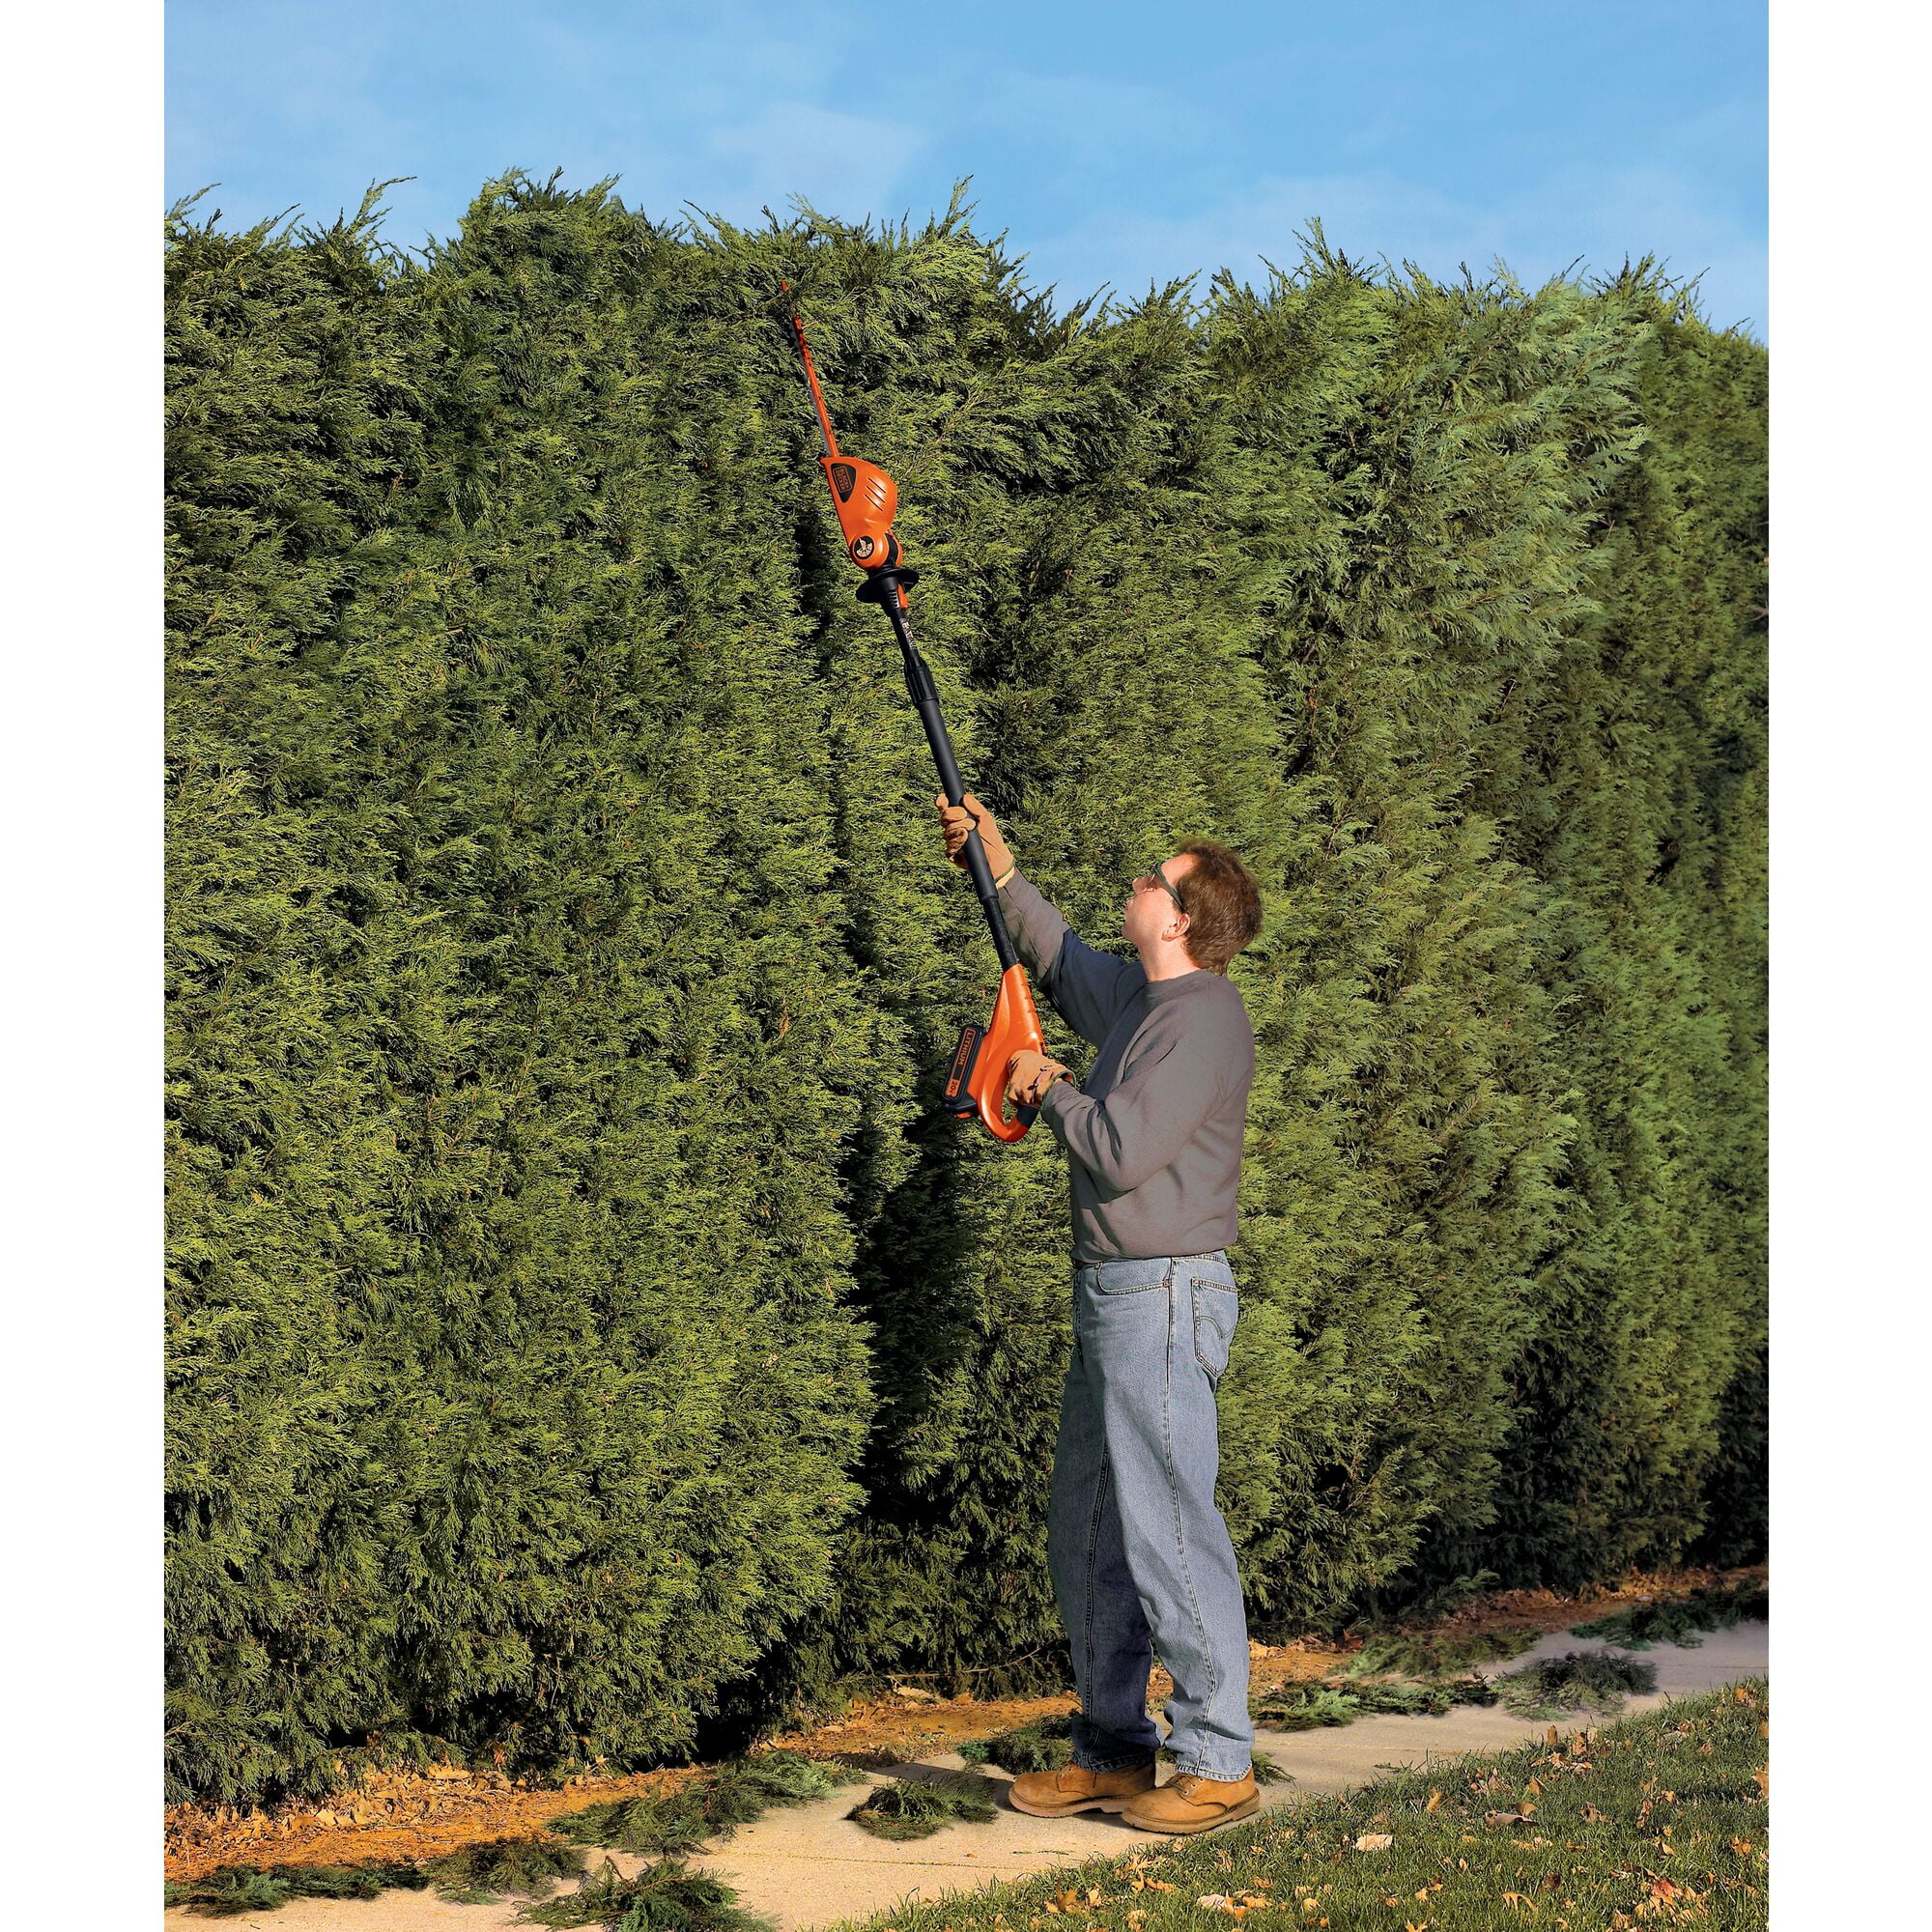 BLACK+DECKER 20V MAX Cordless Battery Powered Pole Hedge Trimmer